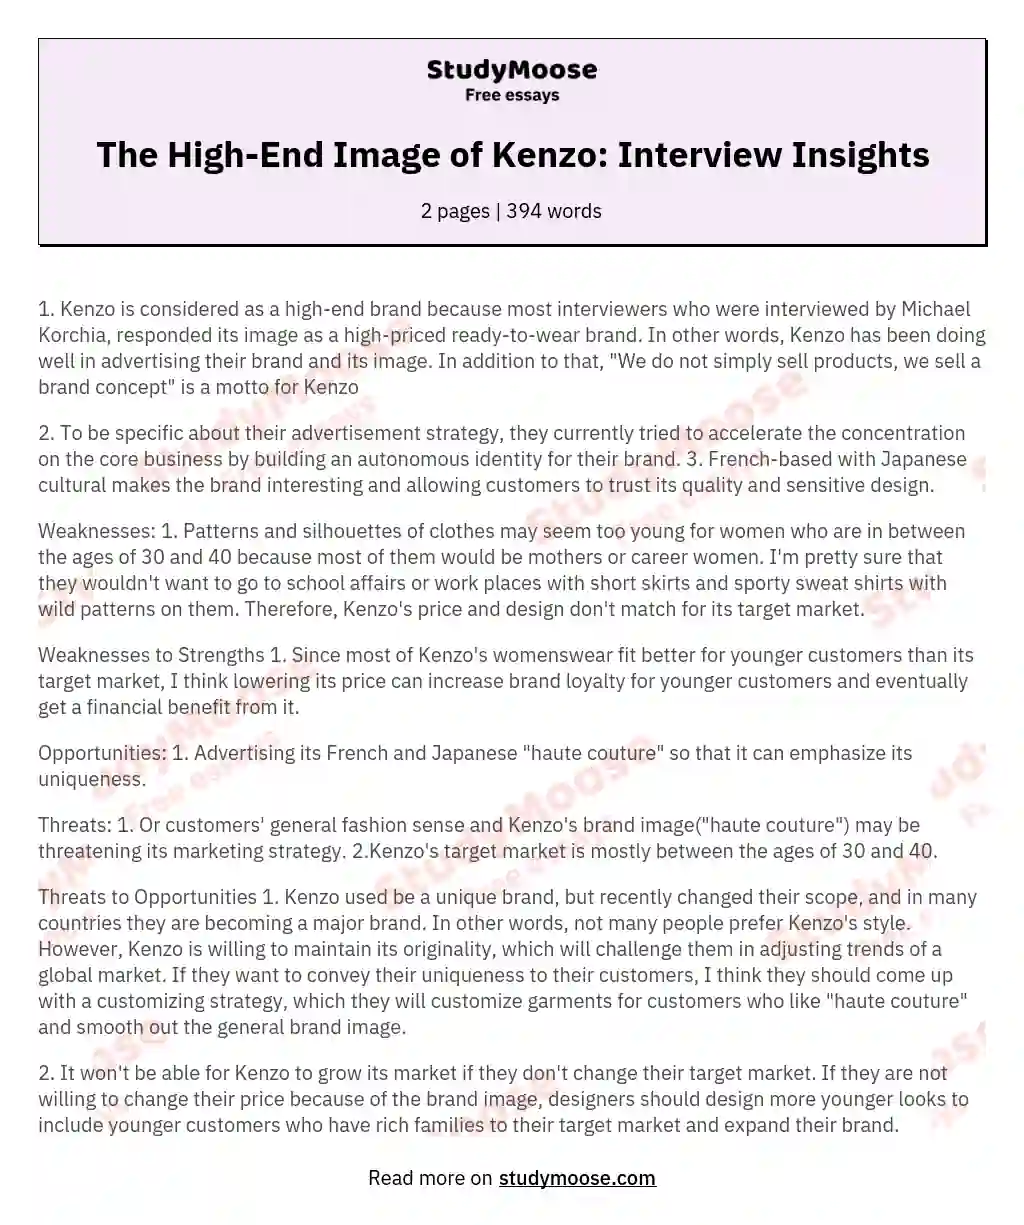 The High-End Image of Kenzo: Interview Insights essay